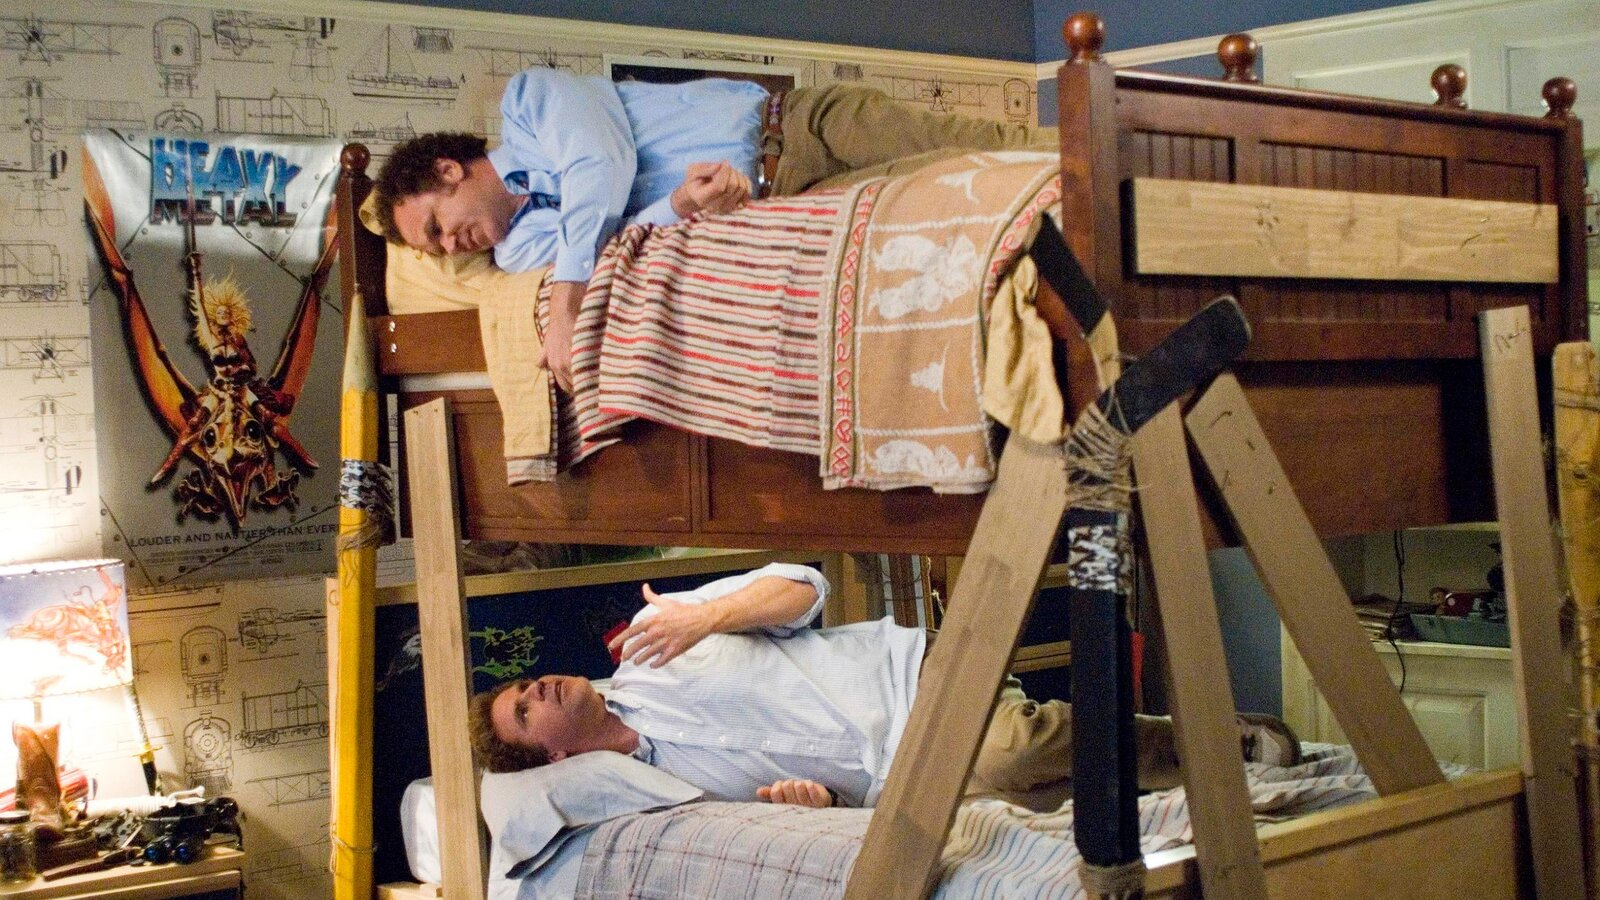 cheryl puckett recommends step brother bunk bed scene pic